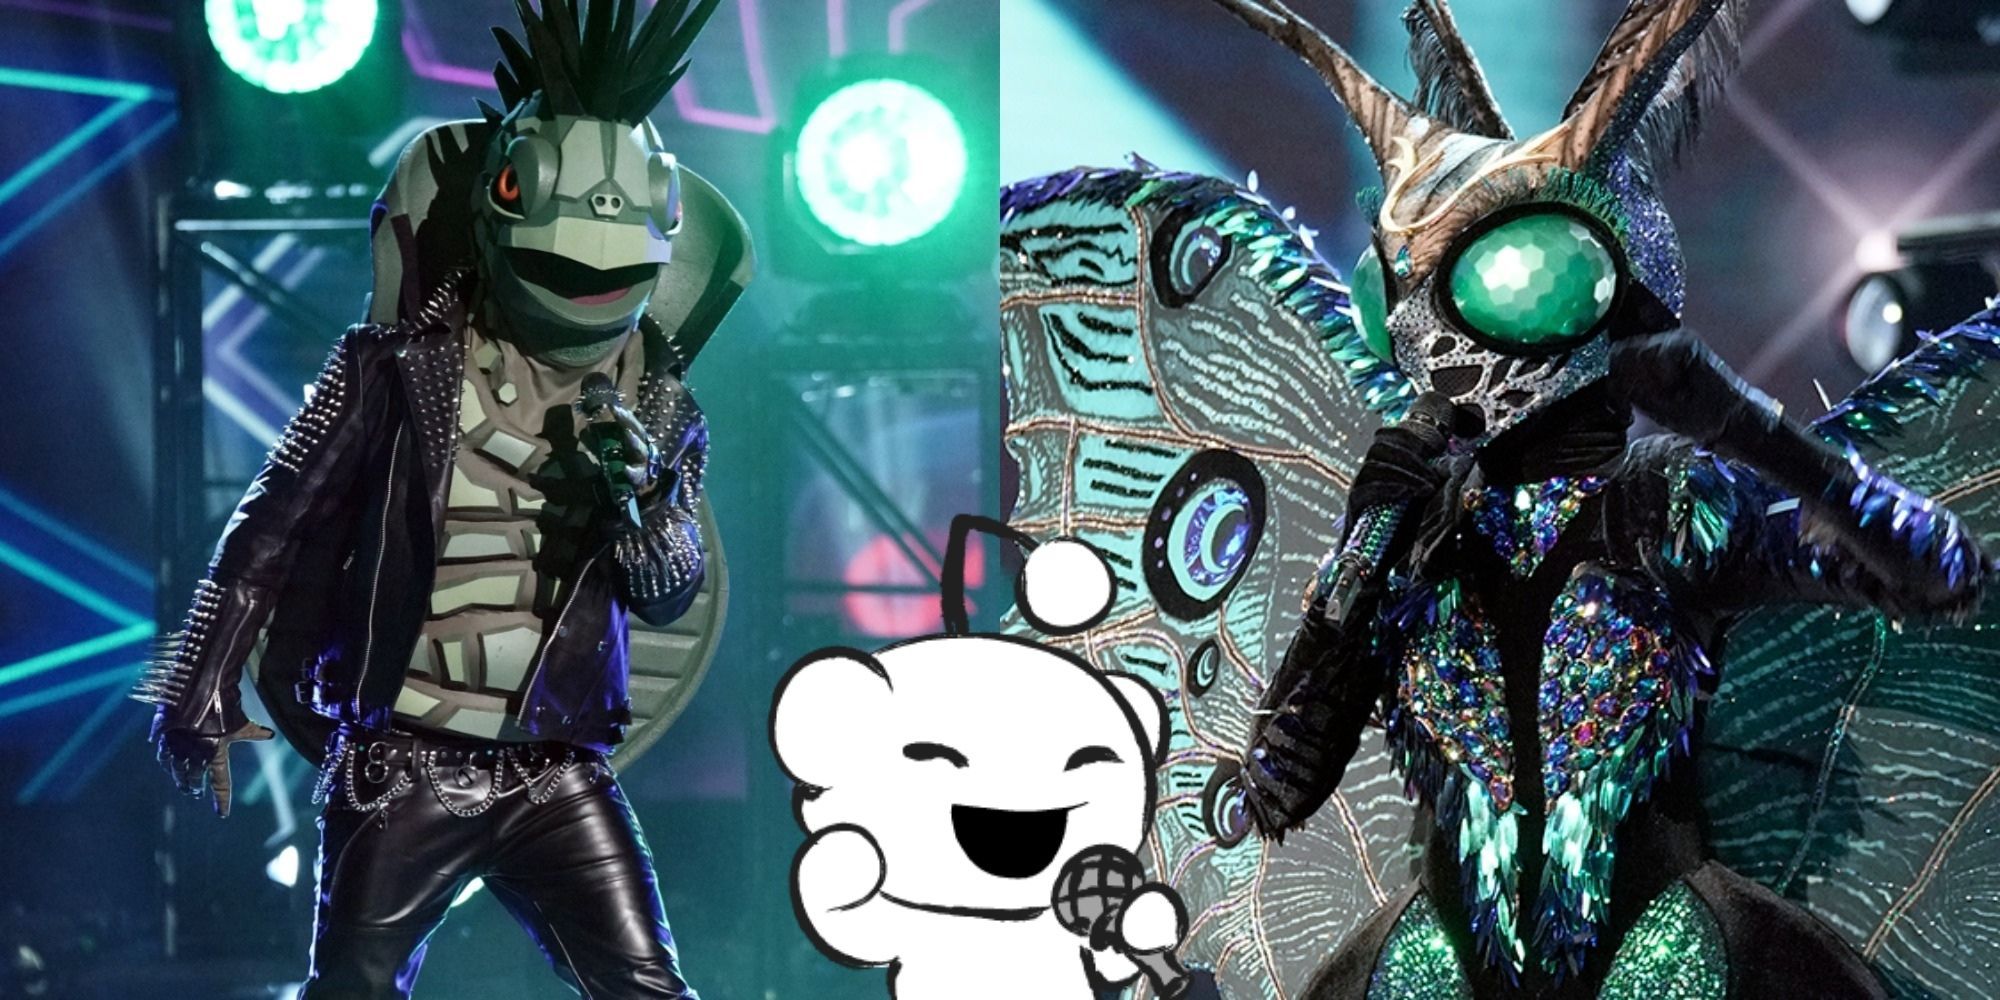 The Masked Singer The 10 Most Unfair Eliminations According to Reddit